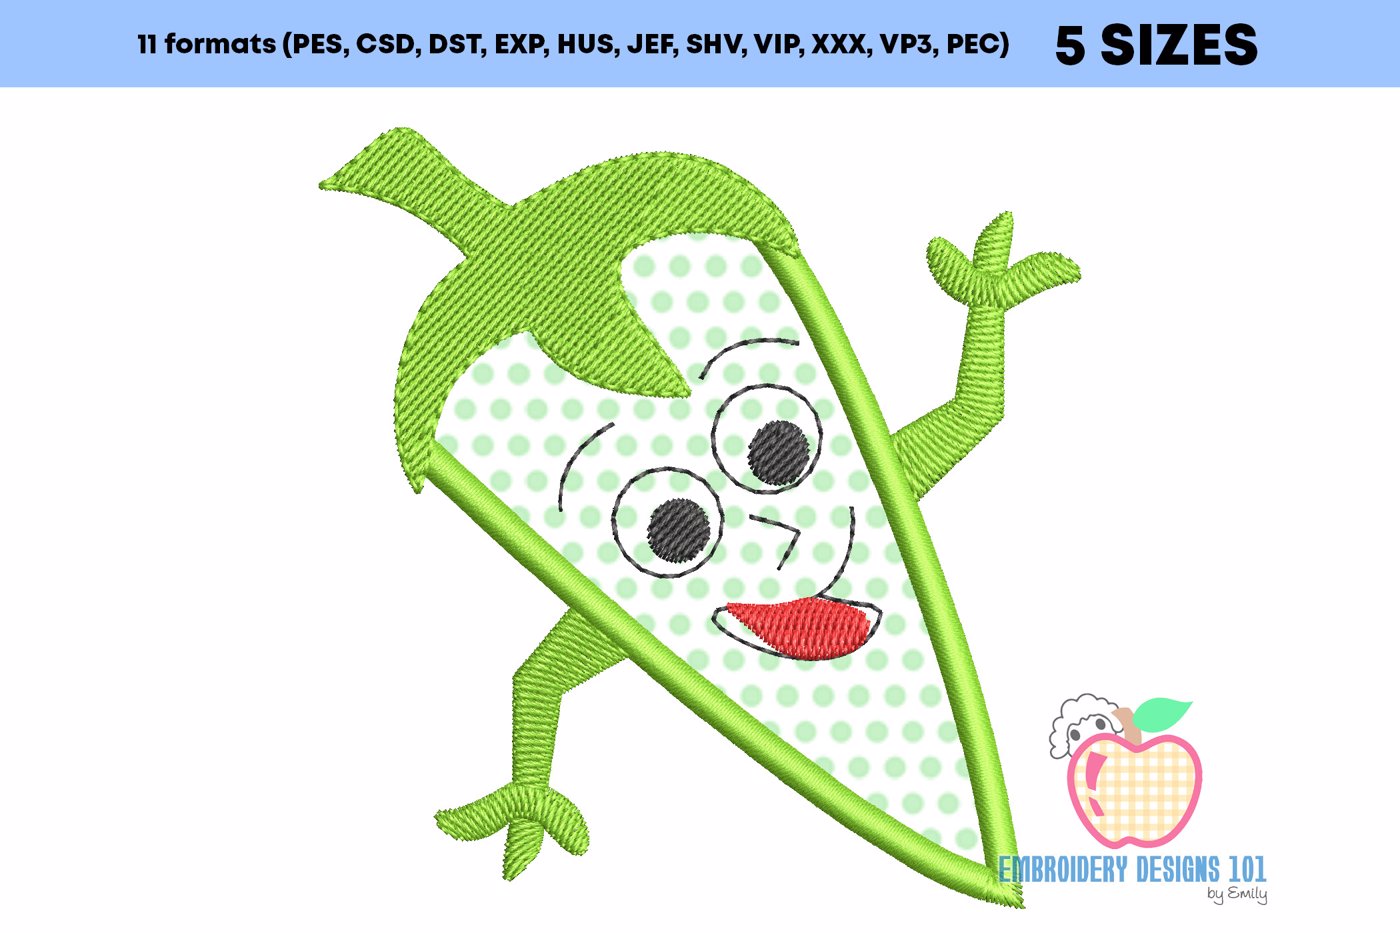 A Green Chilly With Smiling Face Embroidery design